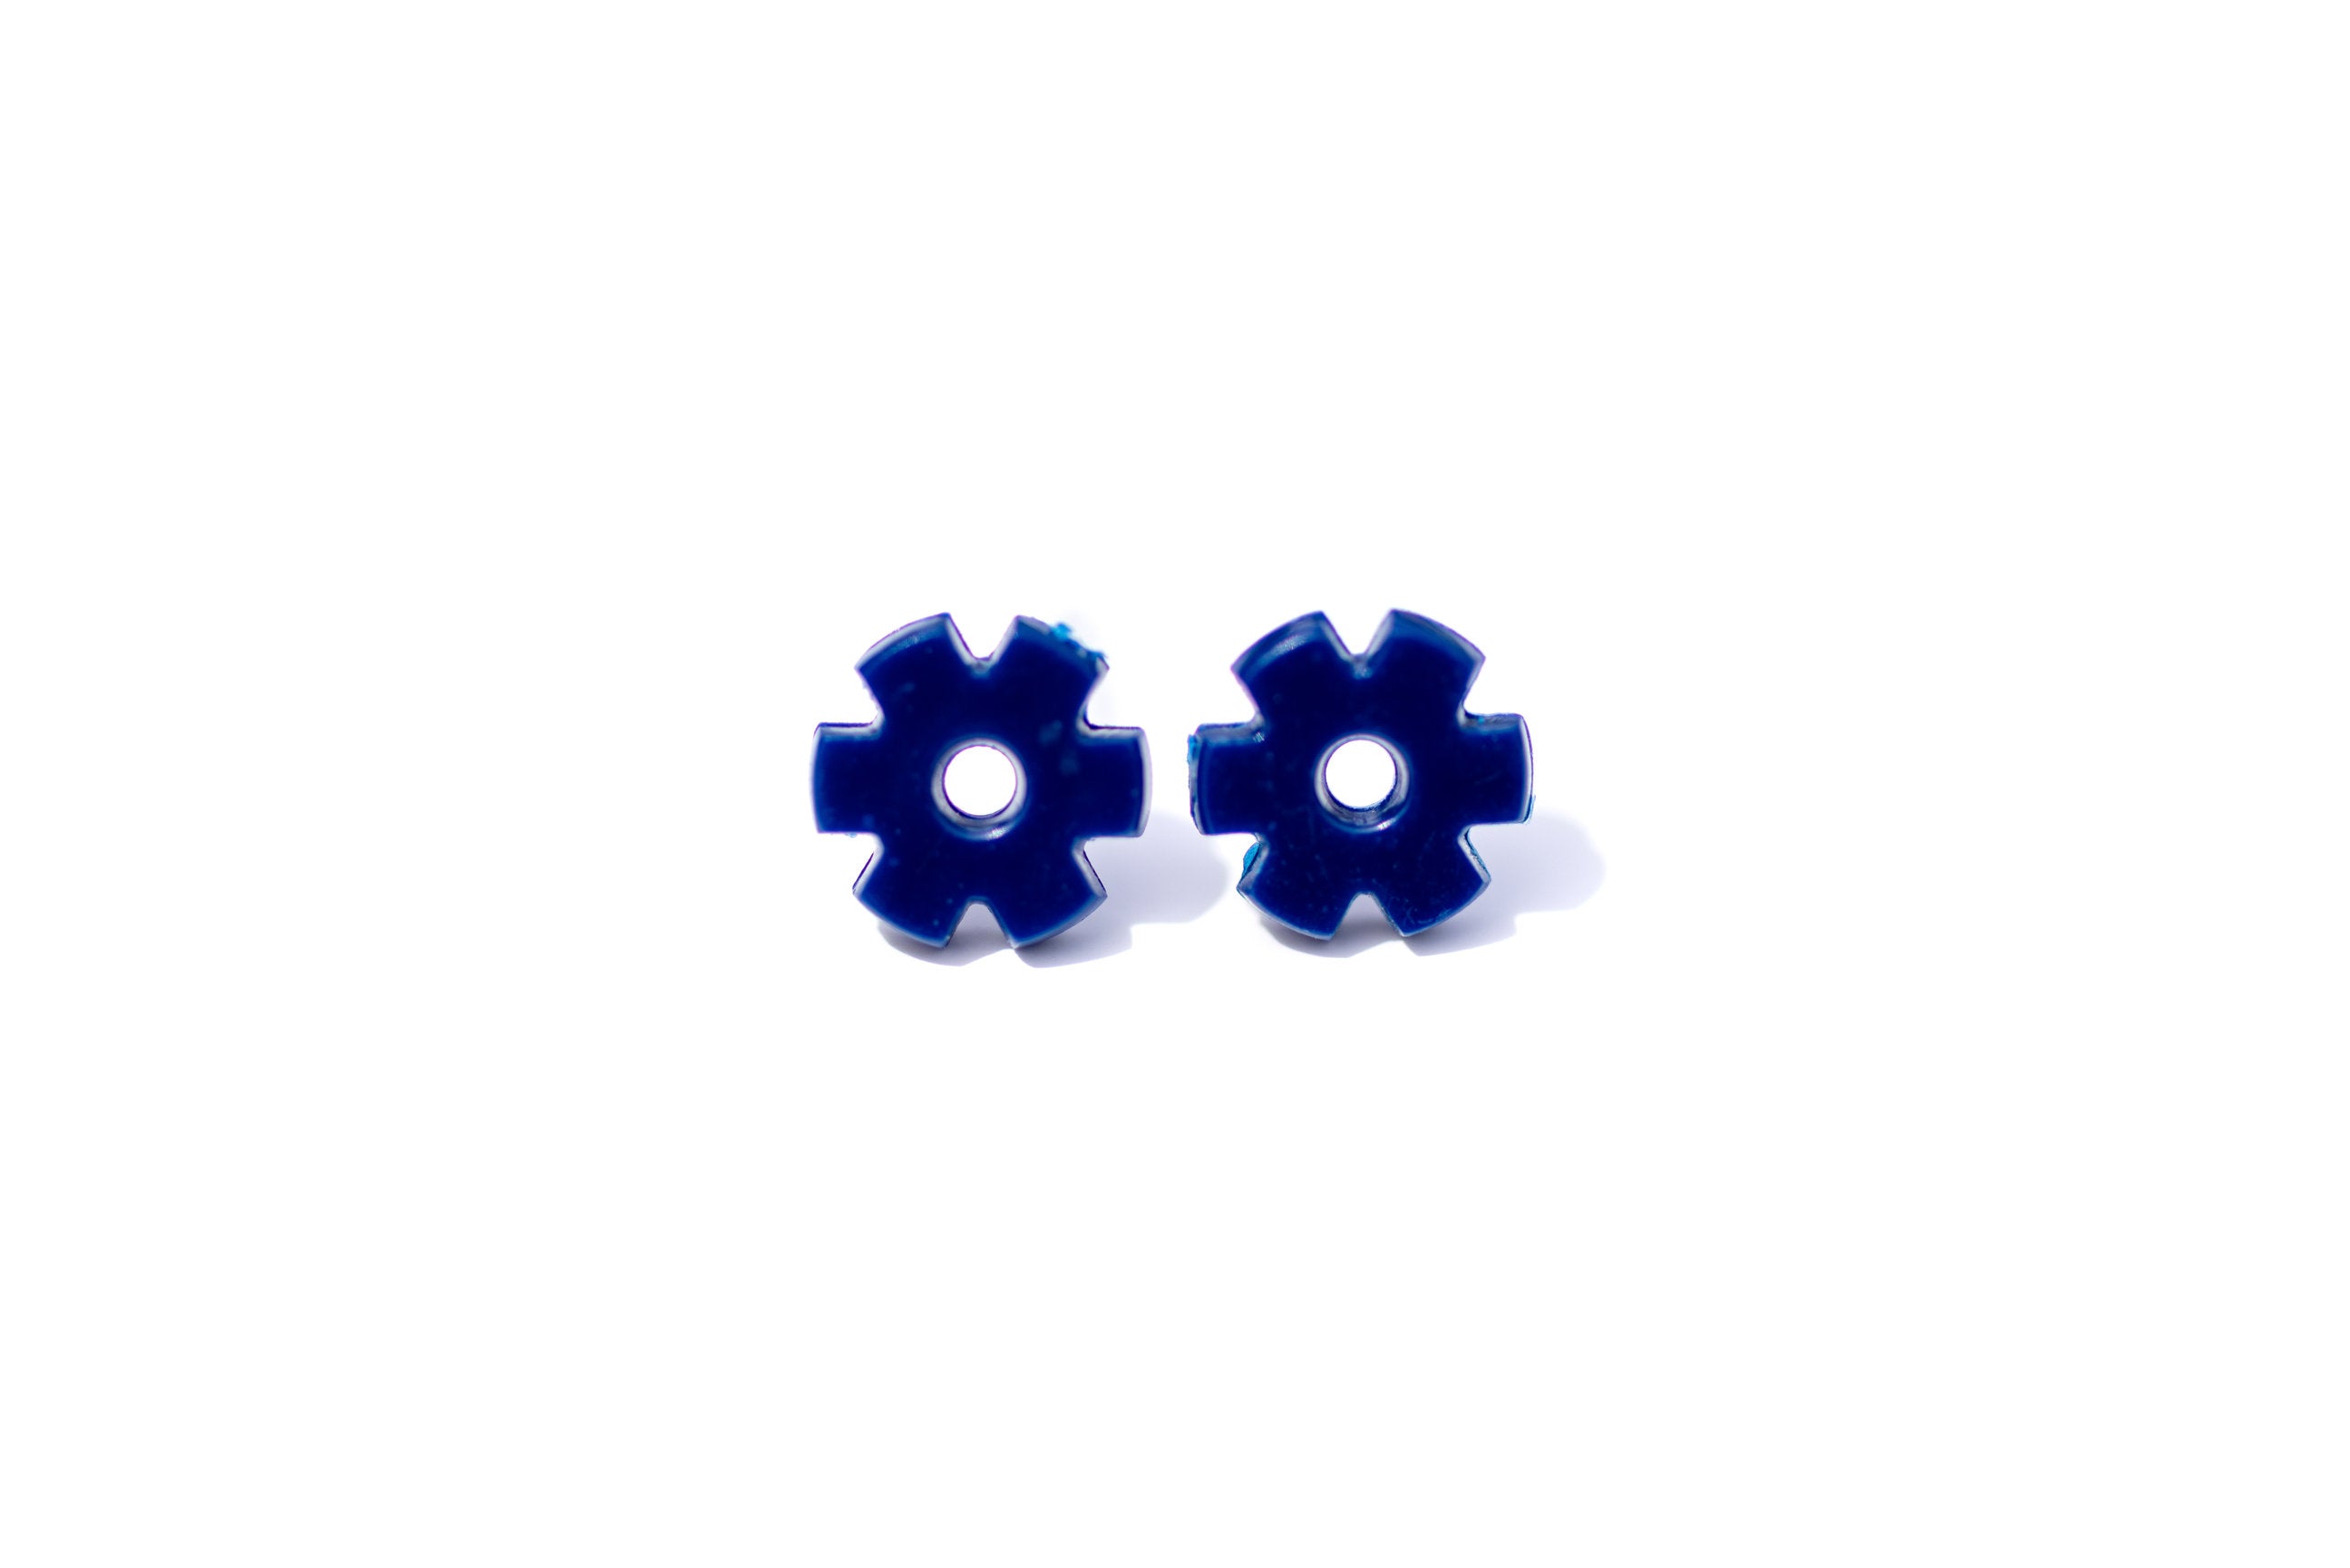 tiny colorful studs